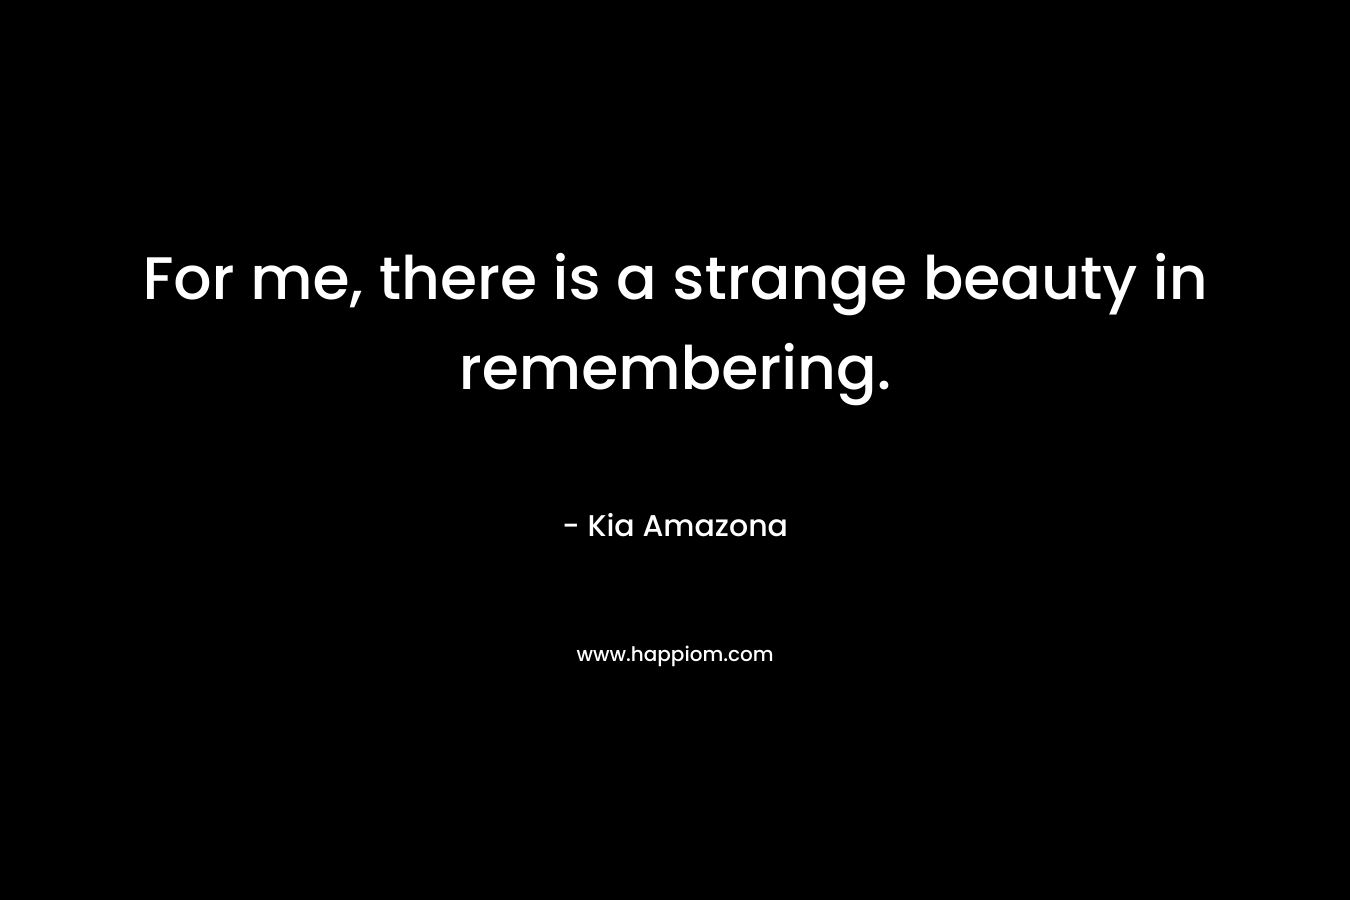 For me, there is a strange beauty in remembering.